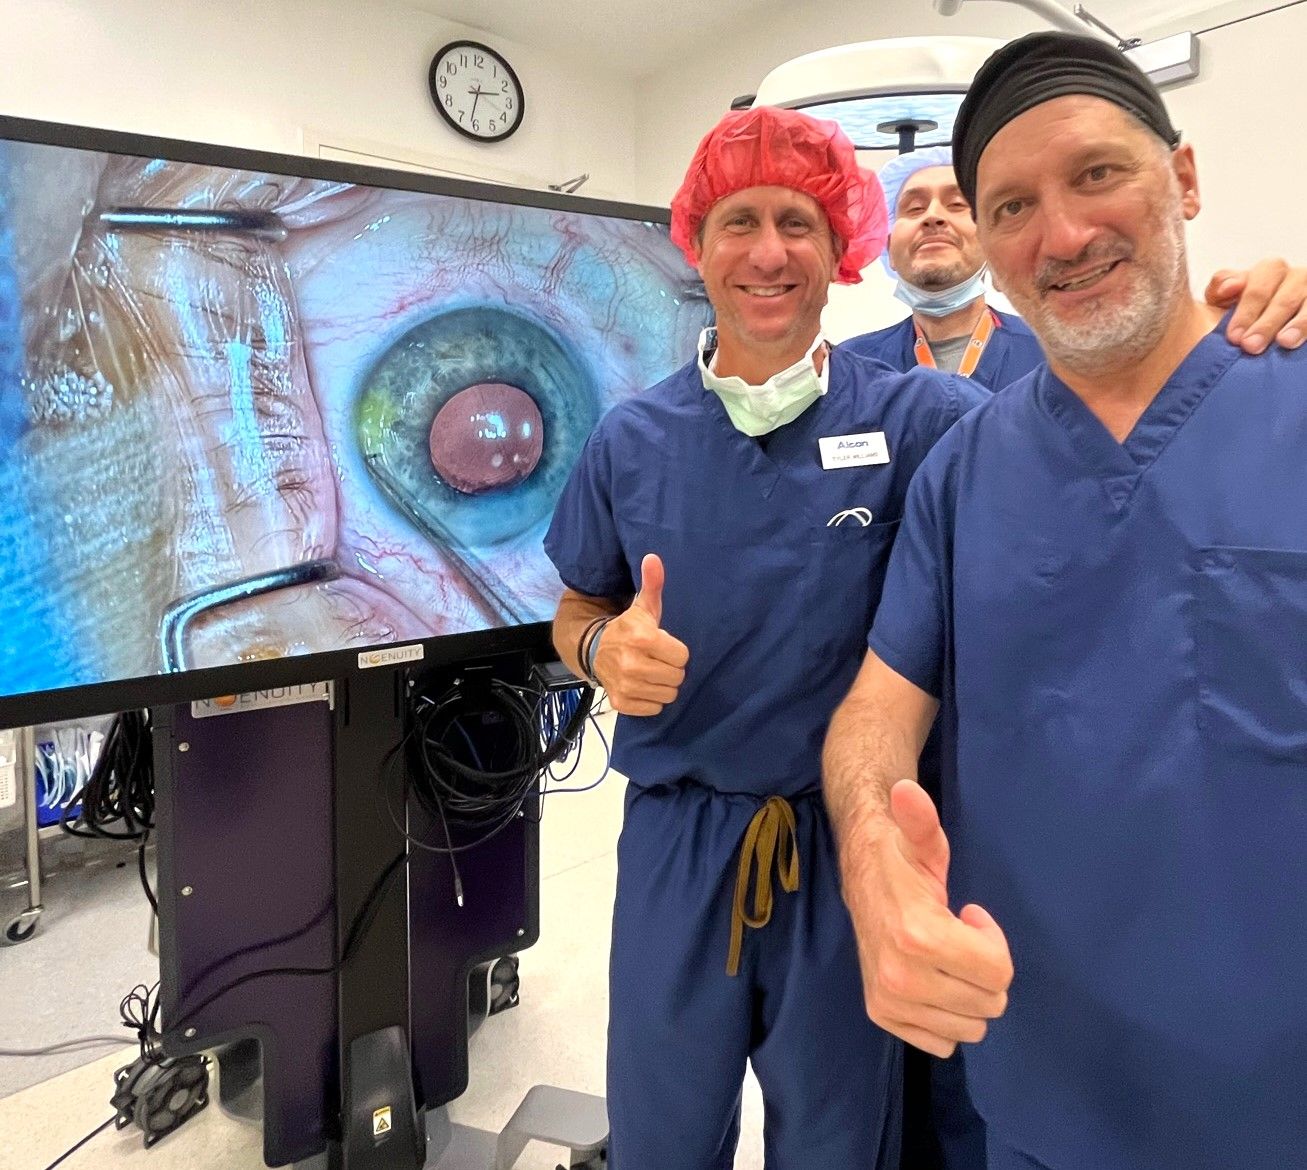 MIGS Surgery: A Highly Successful, Minimally Invasive Treatment for Glaucoma